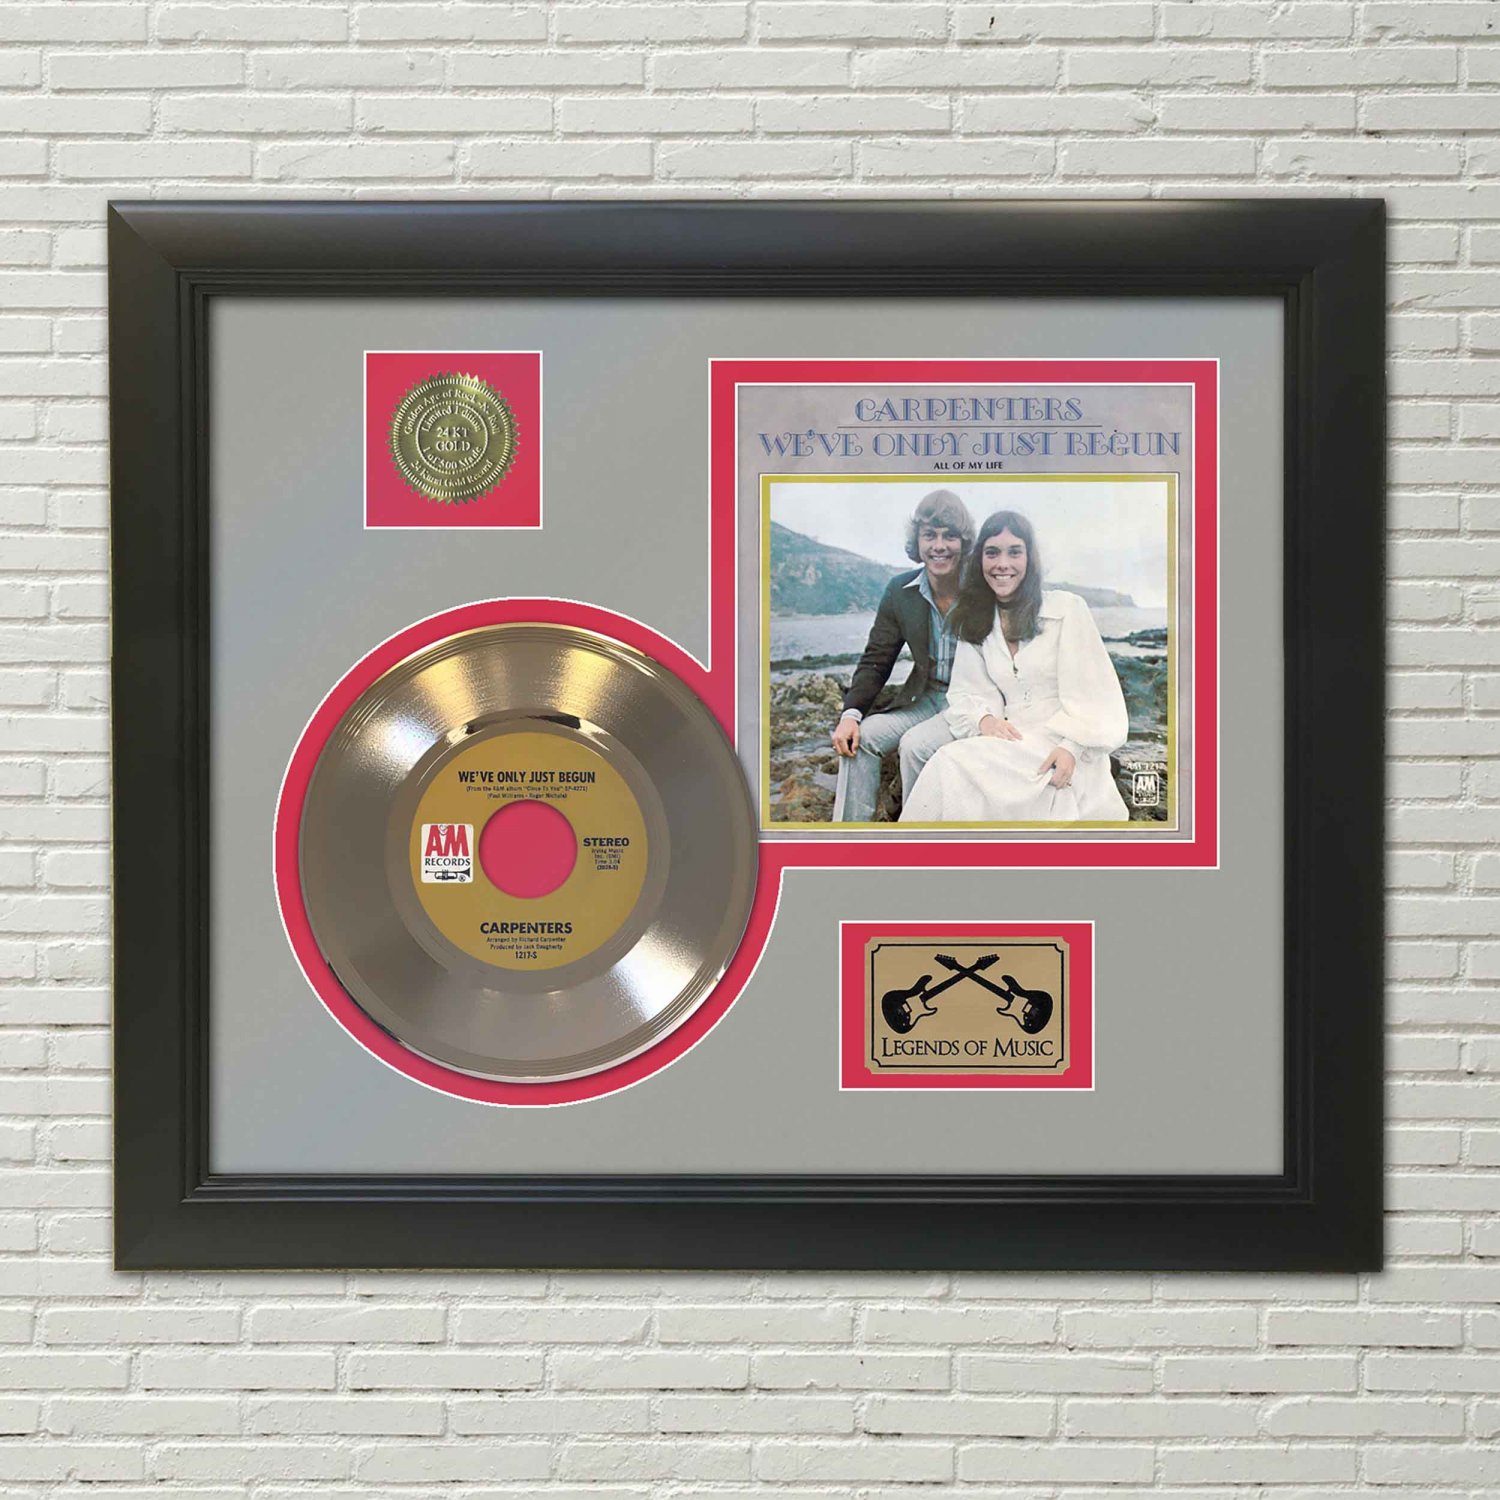 CARPENTERS "We've Only Just Begun" Framed Picture Sleeve Gold 45 Record Display